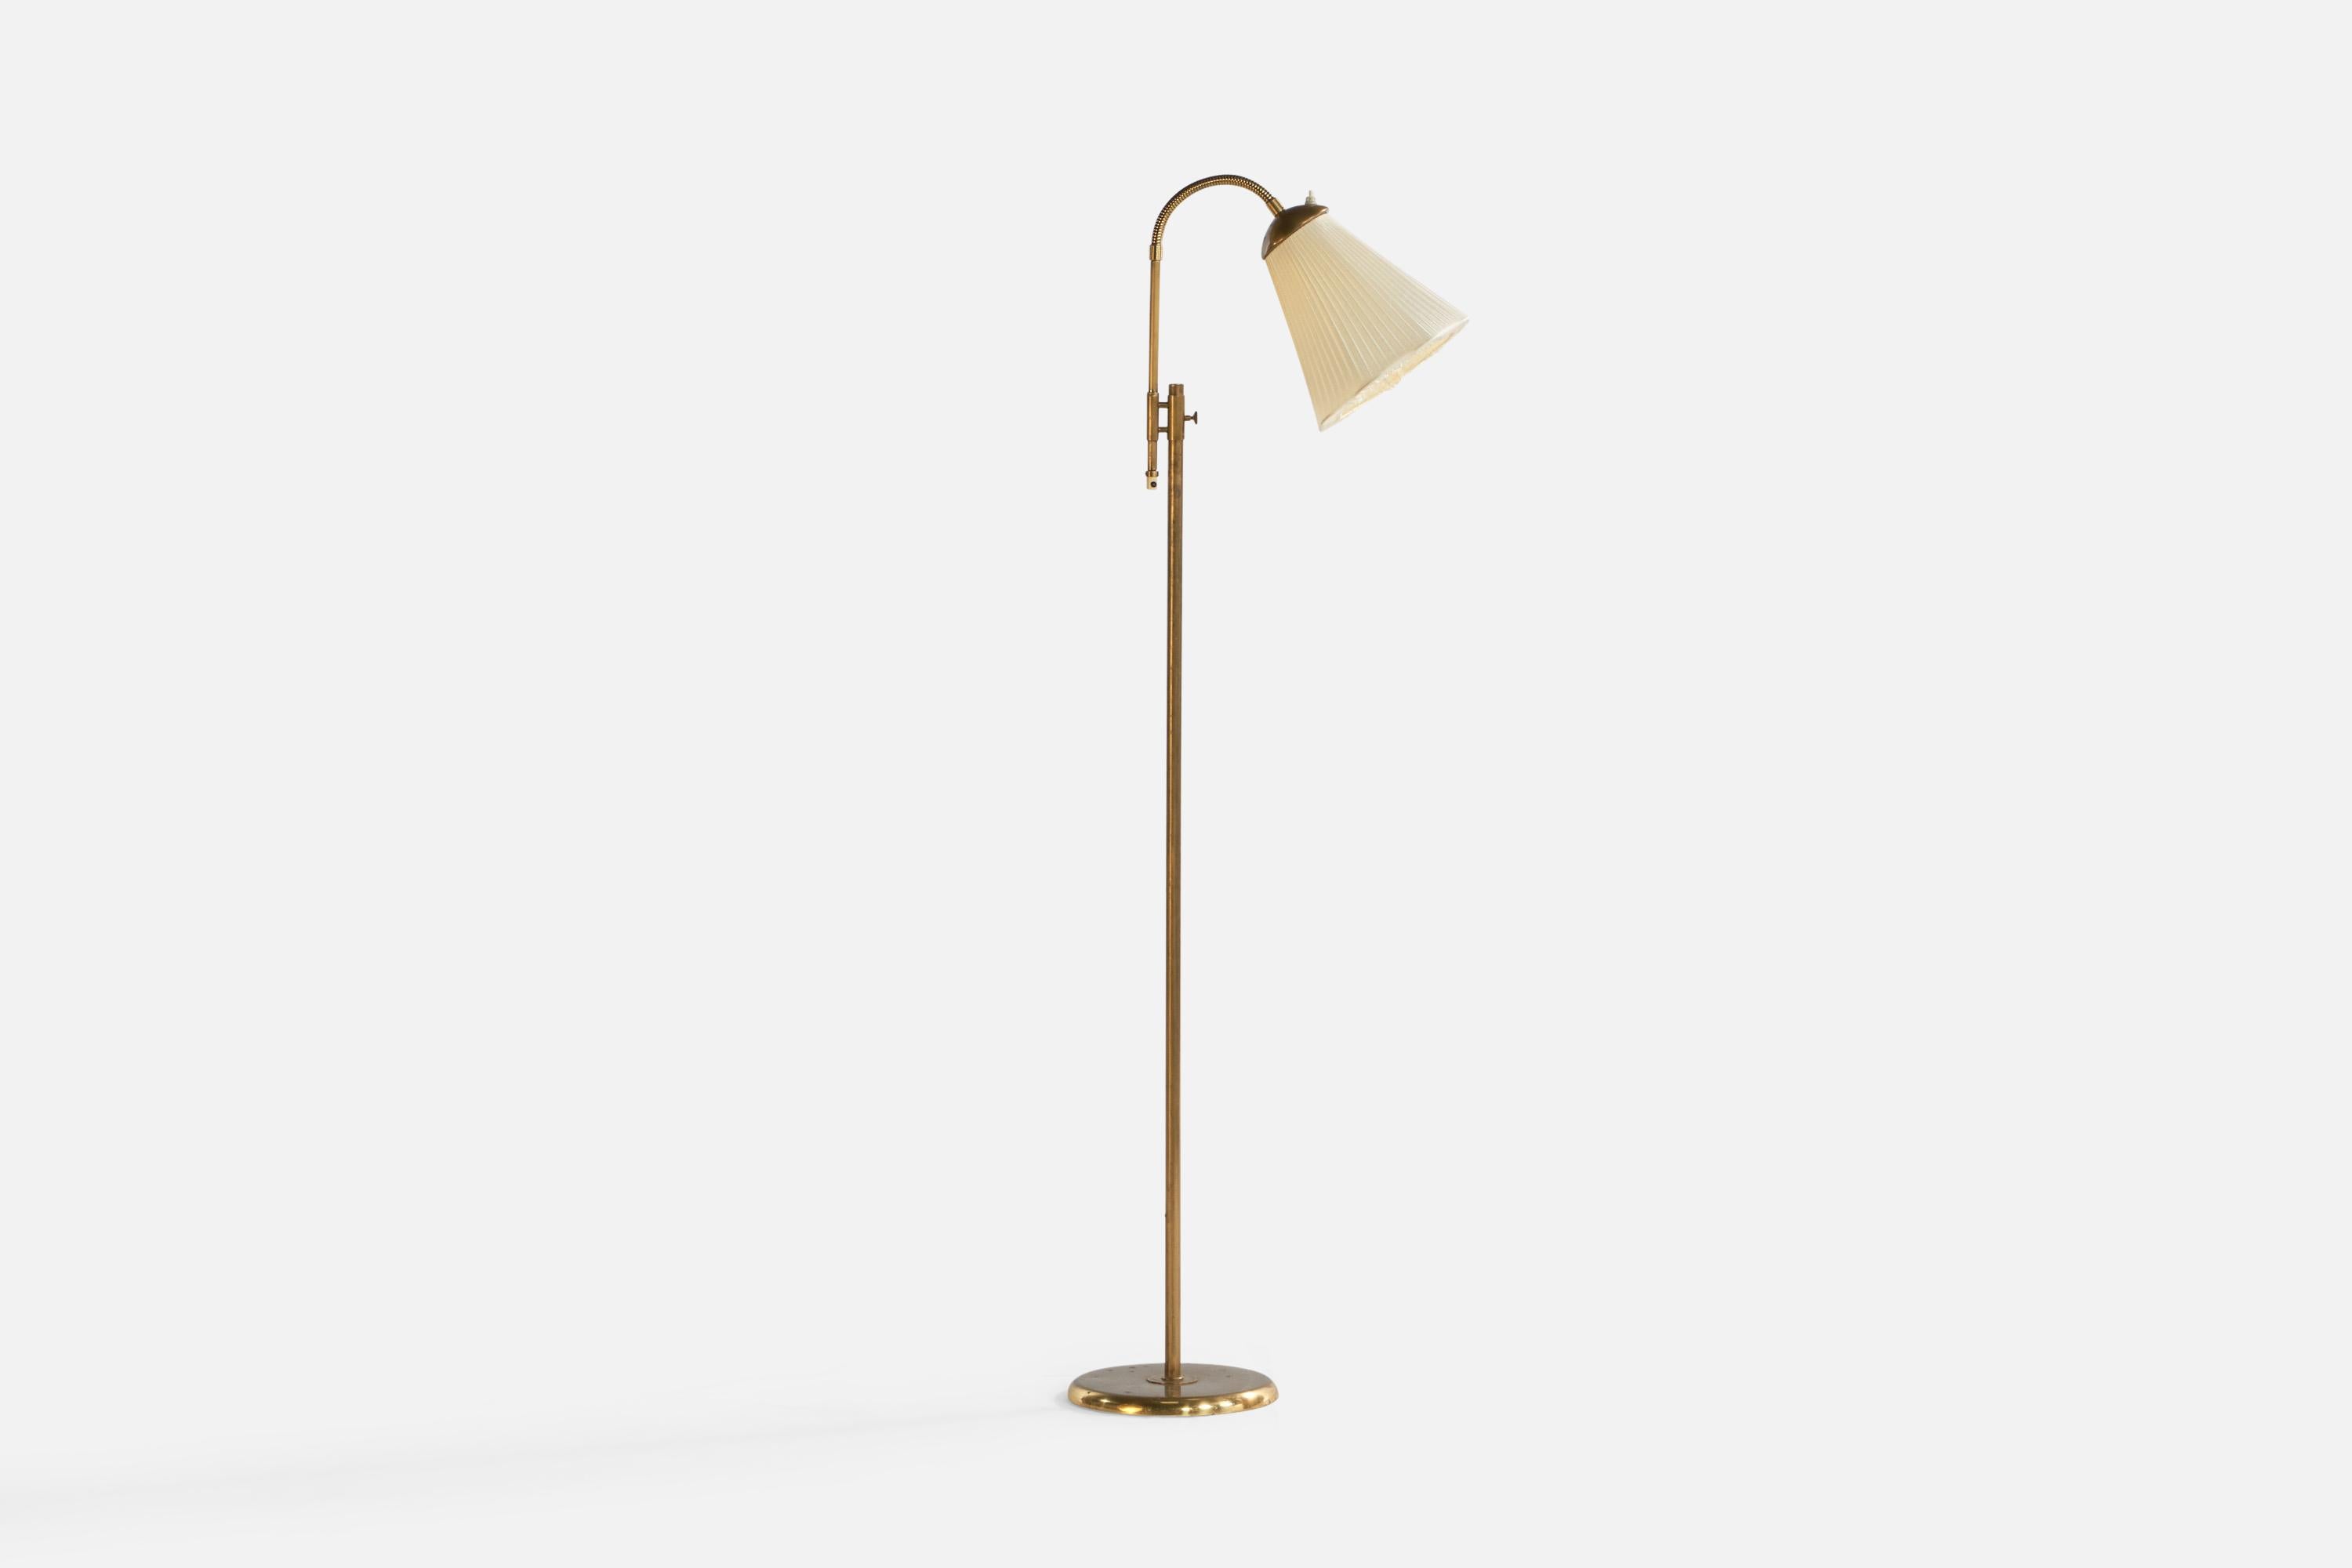 An adjustable brass and off-white fabric floor lamp designed and produced in Sweden, c. 1960s.

Note that cord feeds from bottom of stem connected to socket.

Overall Dimensions (inches): 59.25” H x 10” W x 20.5” D. Stated dimensions include